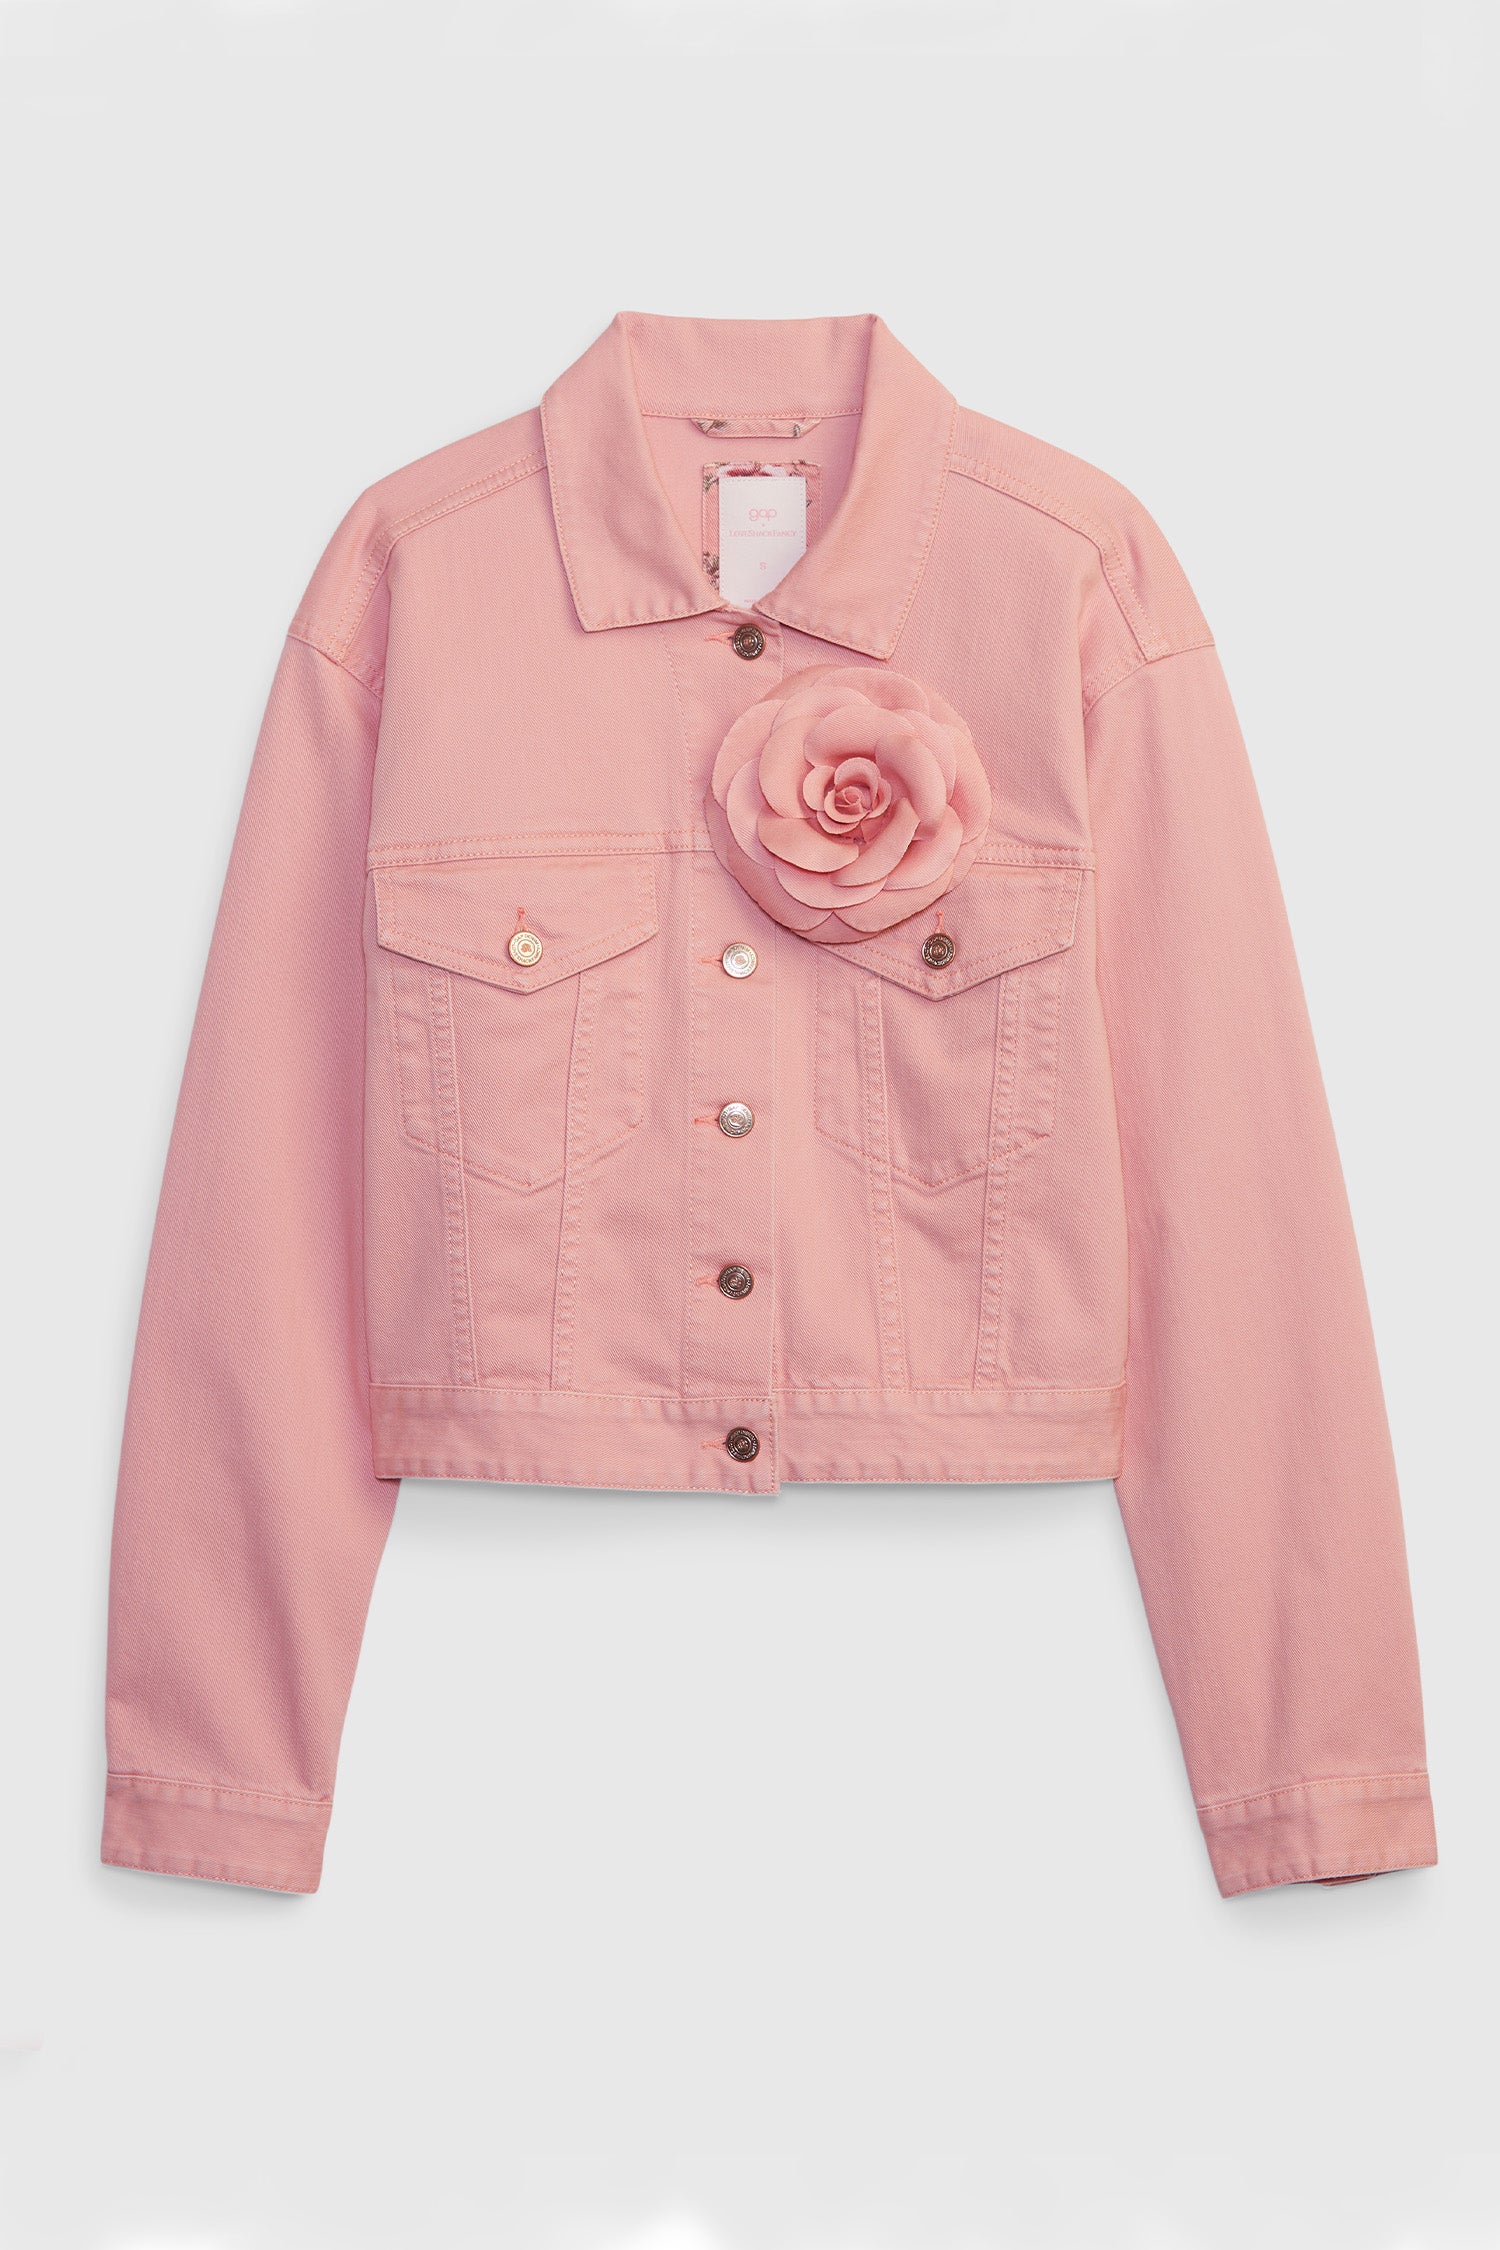 Model wearing pink denim jacket with rosette on chest